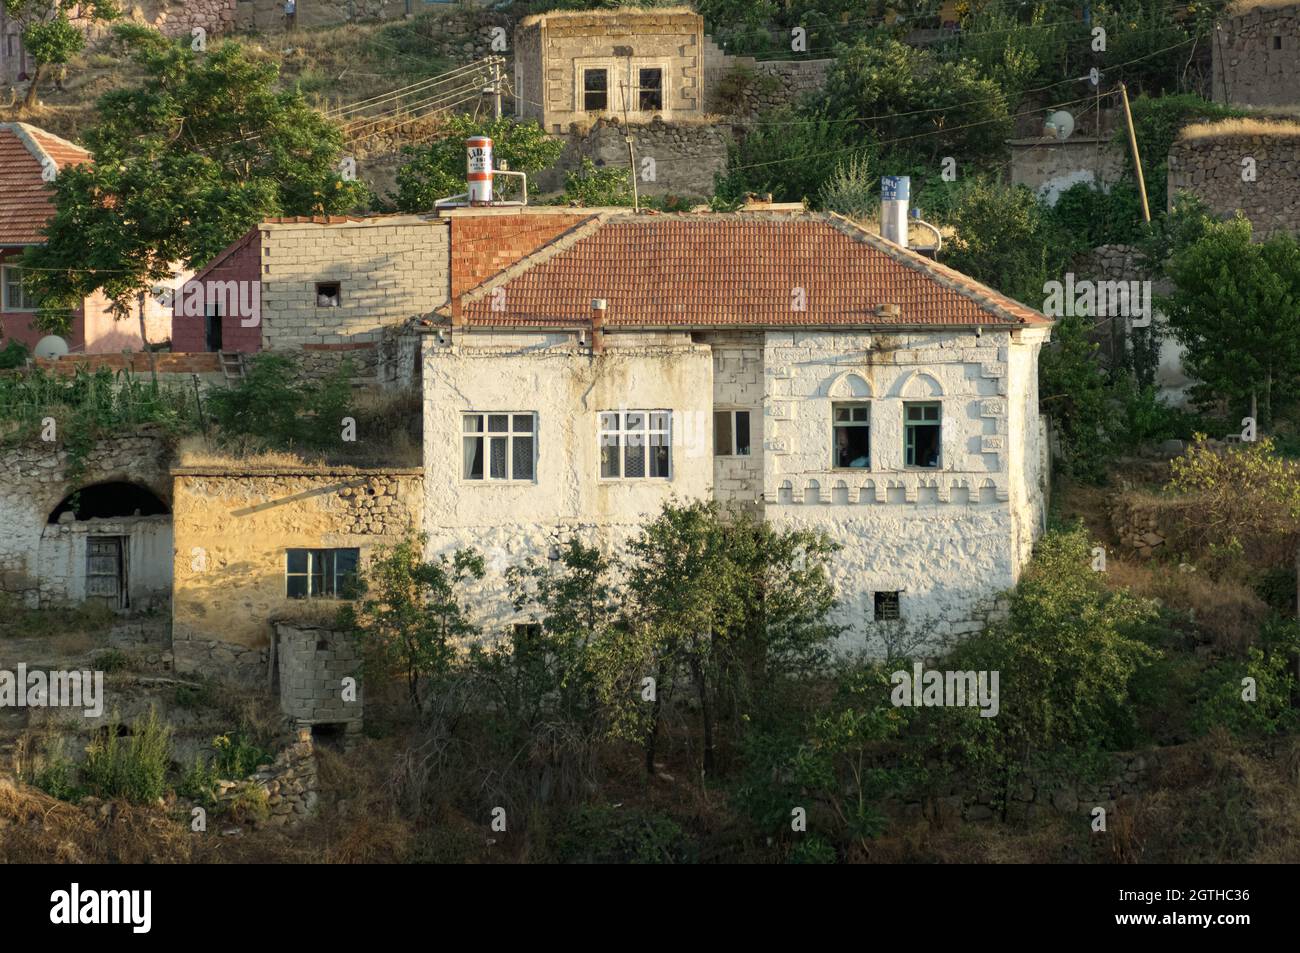 rural architecture in turkey country stone whitewashed palace in central Anatolia Stock Photo